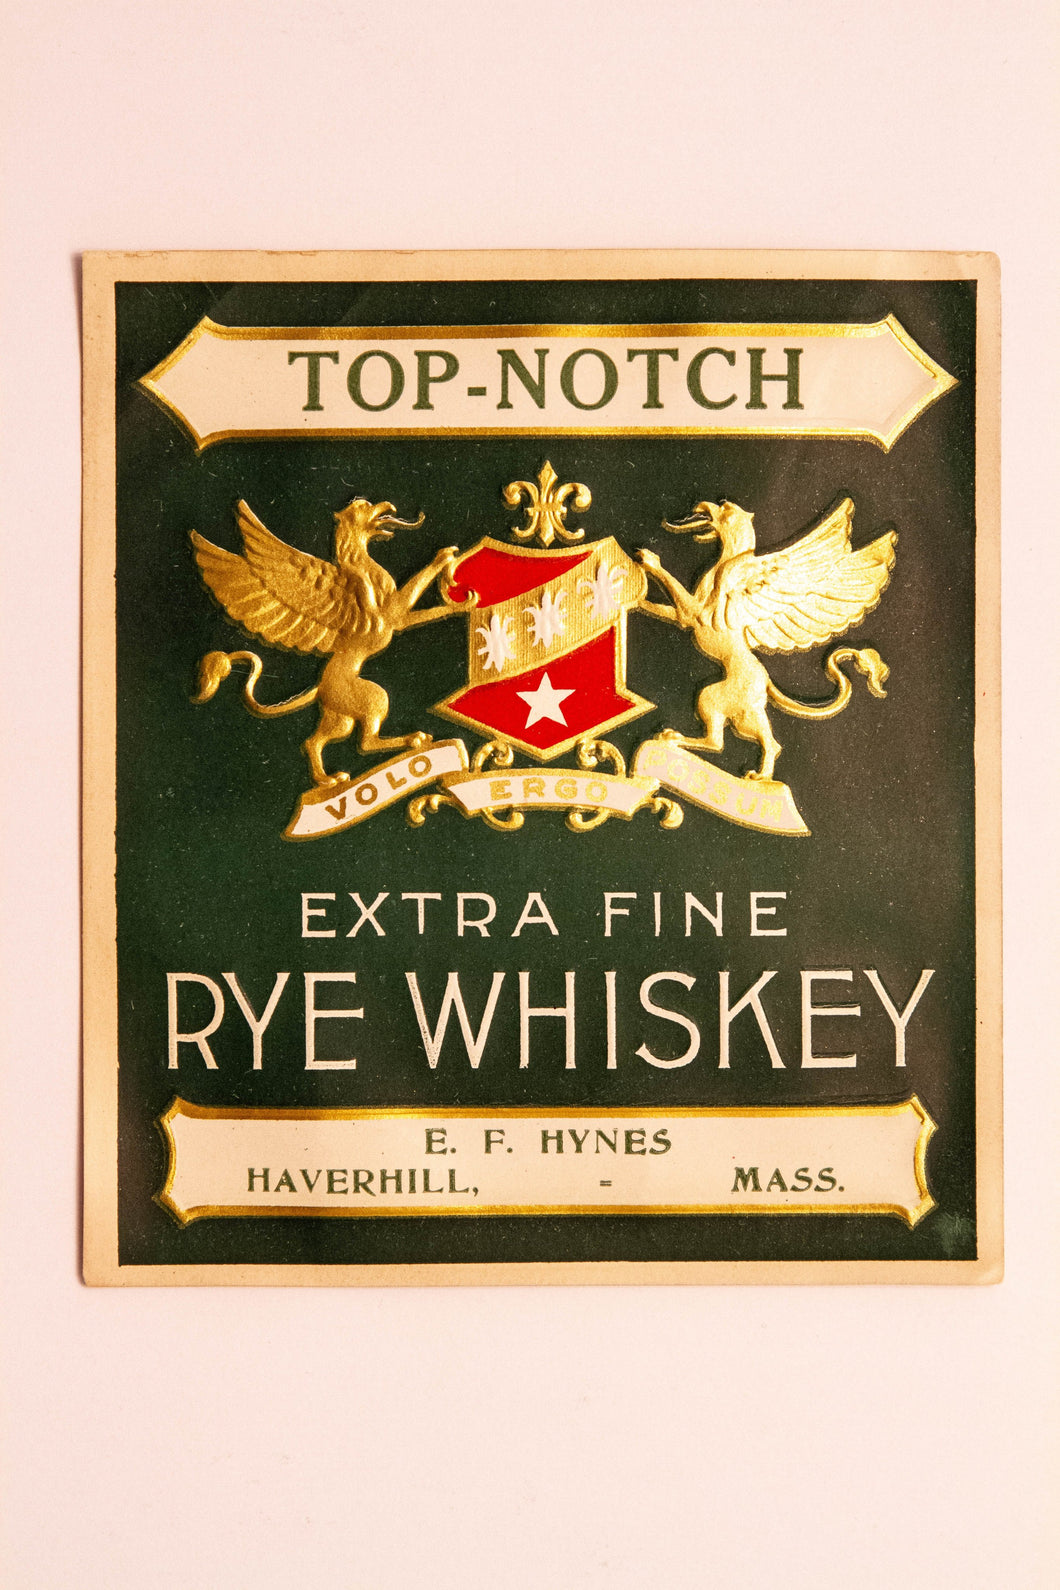 Old Vintage, TOP-NOTCH Extra Fine RYE WHISKEY Label, Hynes, Alcohol - TheBoxSF